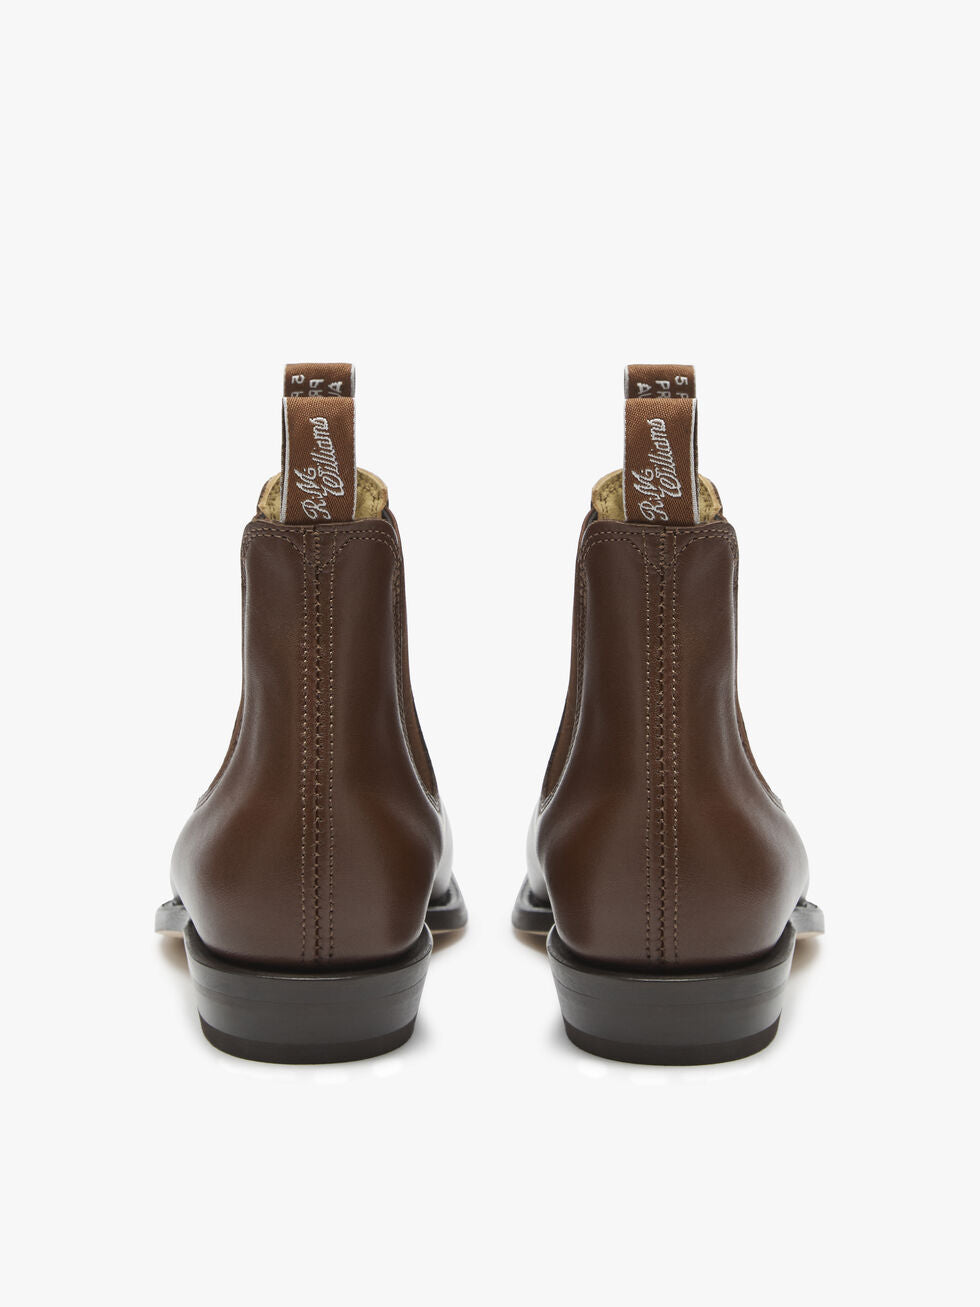 R.M. Williams Adelaide Boot - SOLD IN STORE ONLY